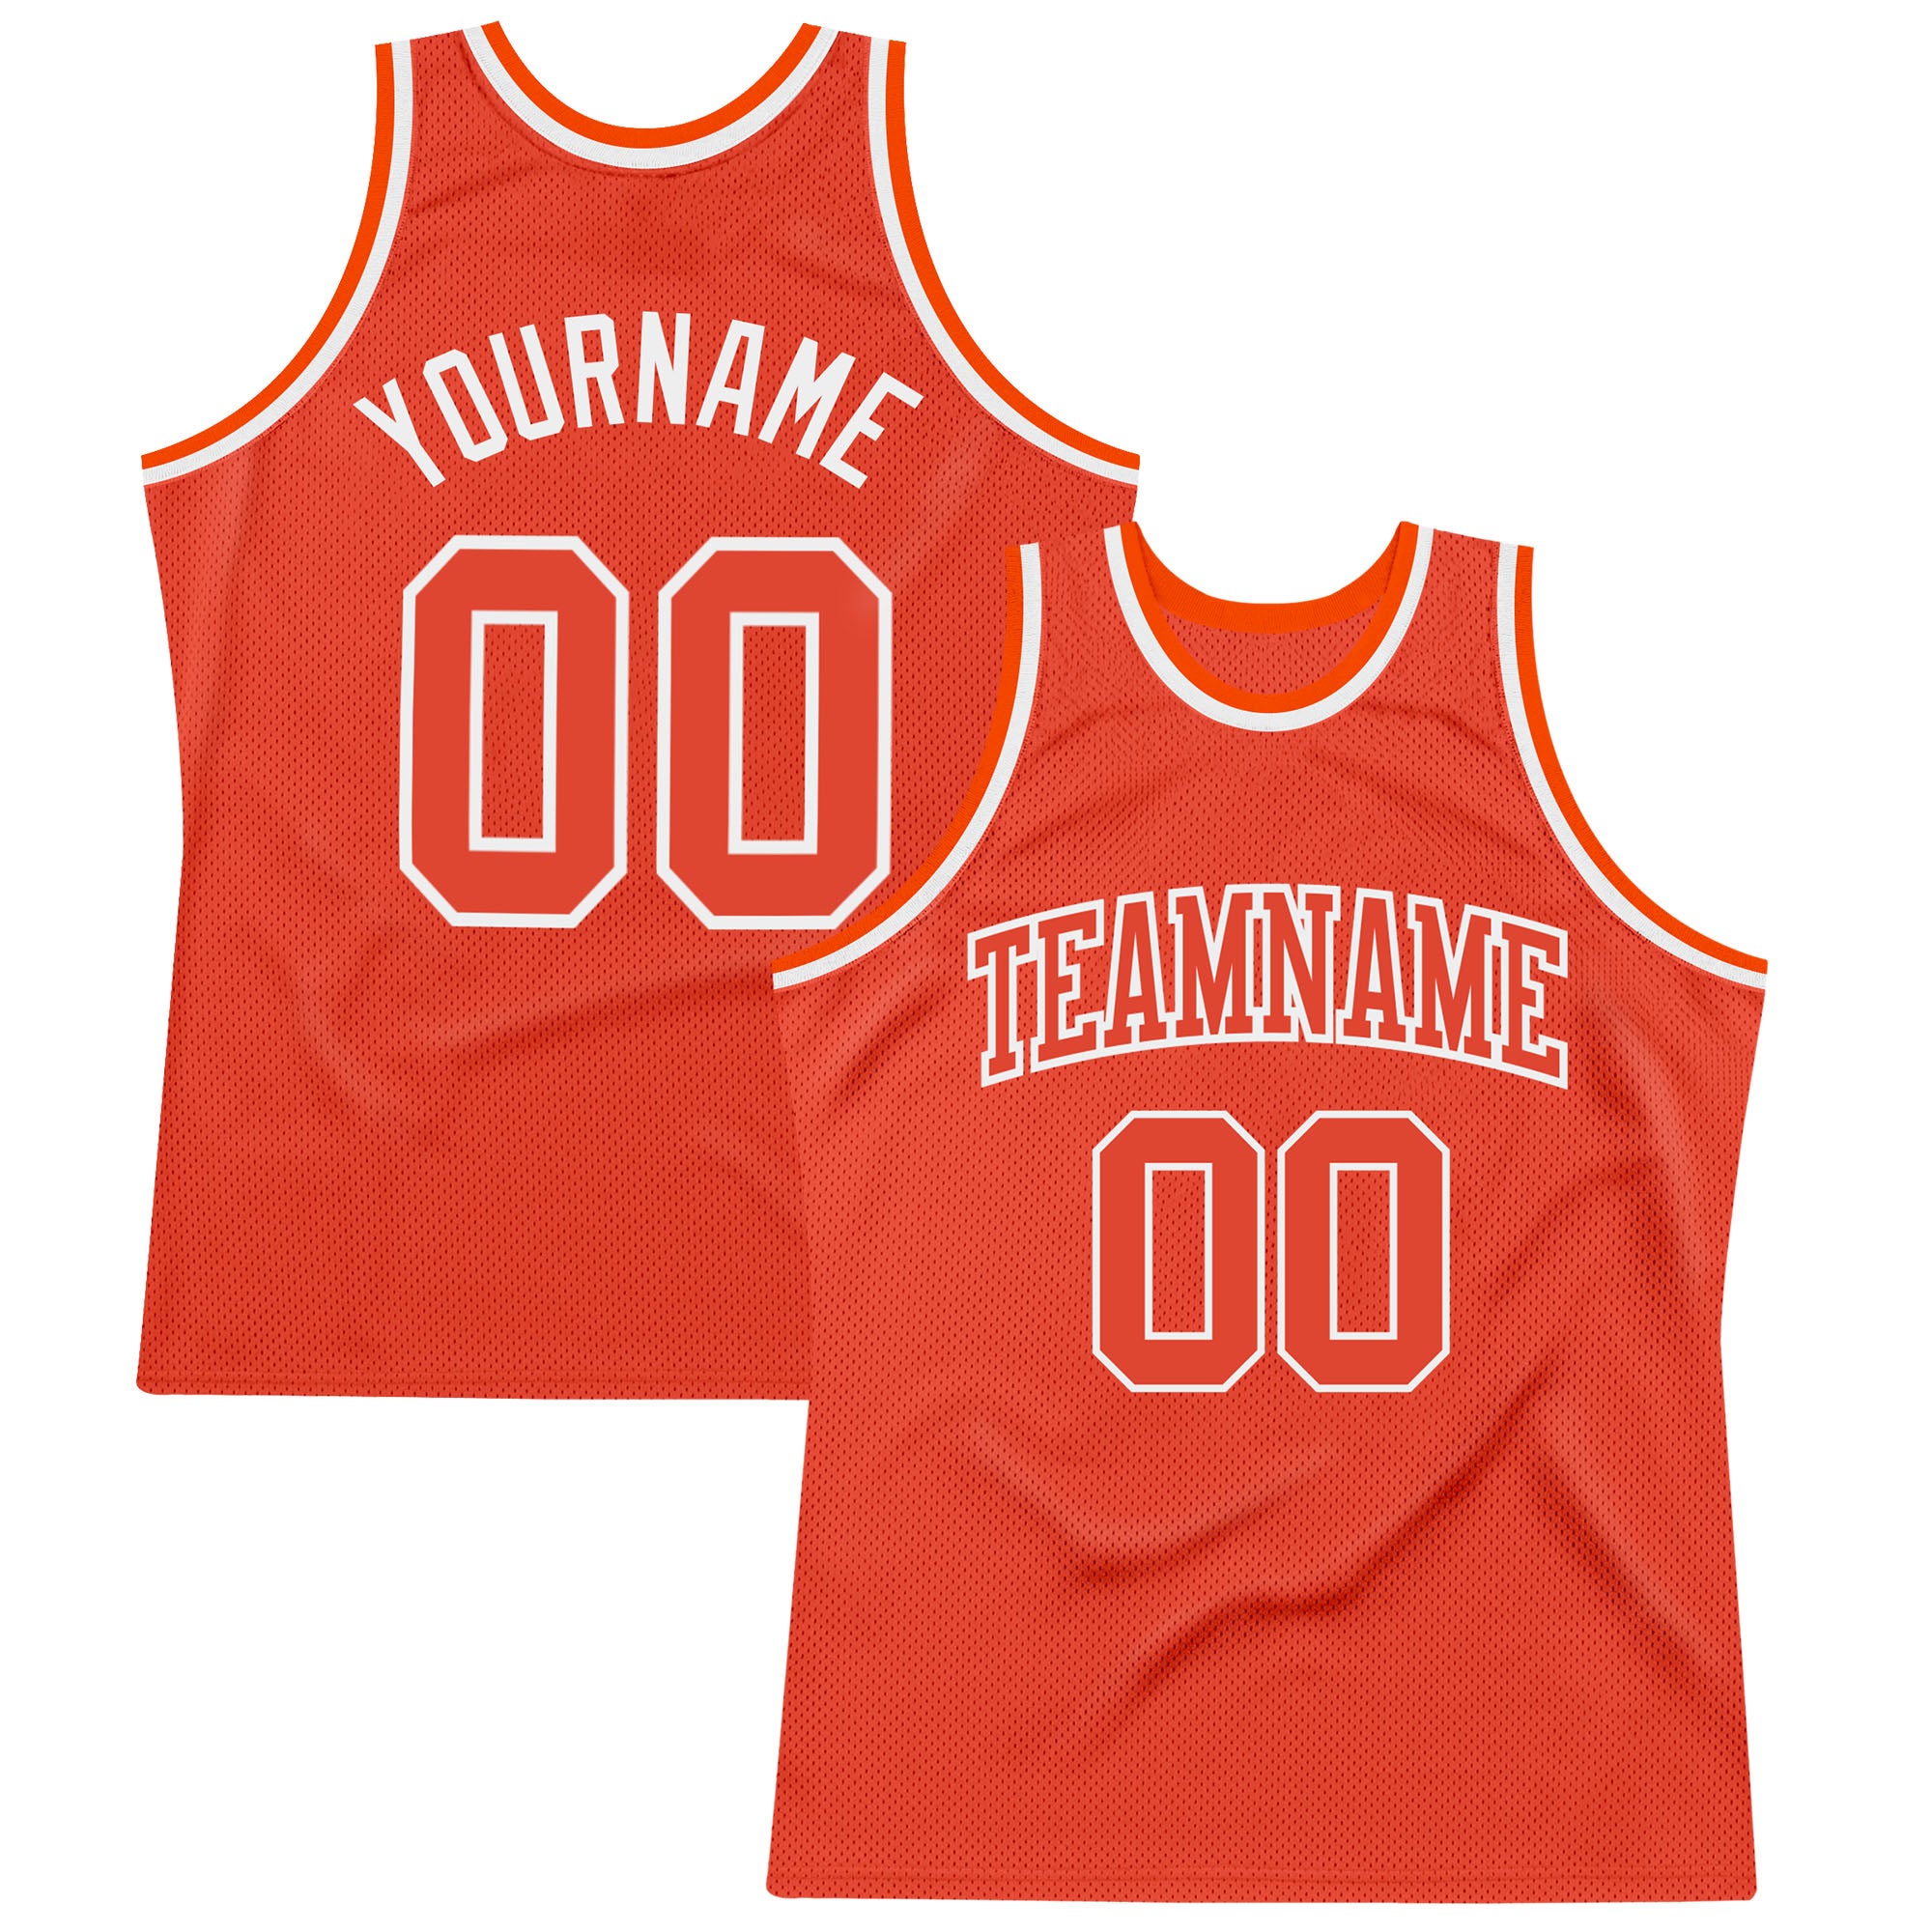 Wholesale Men latest 3XL basketball jersey design Youth Stitched Jersey  Comfortable Custom Basketball Uniform Sports Wear From m.